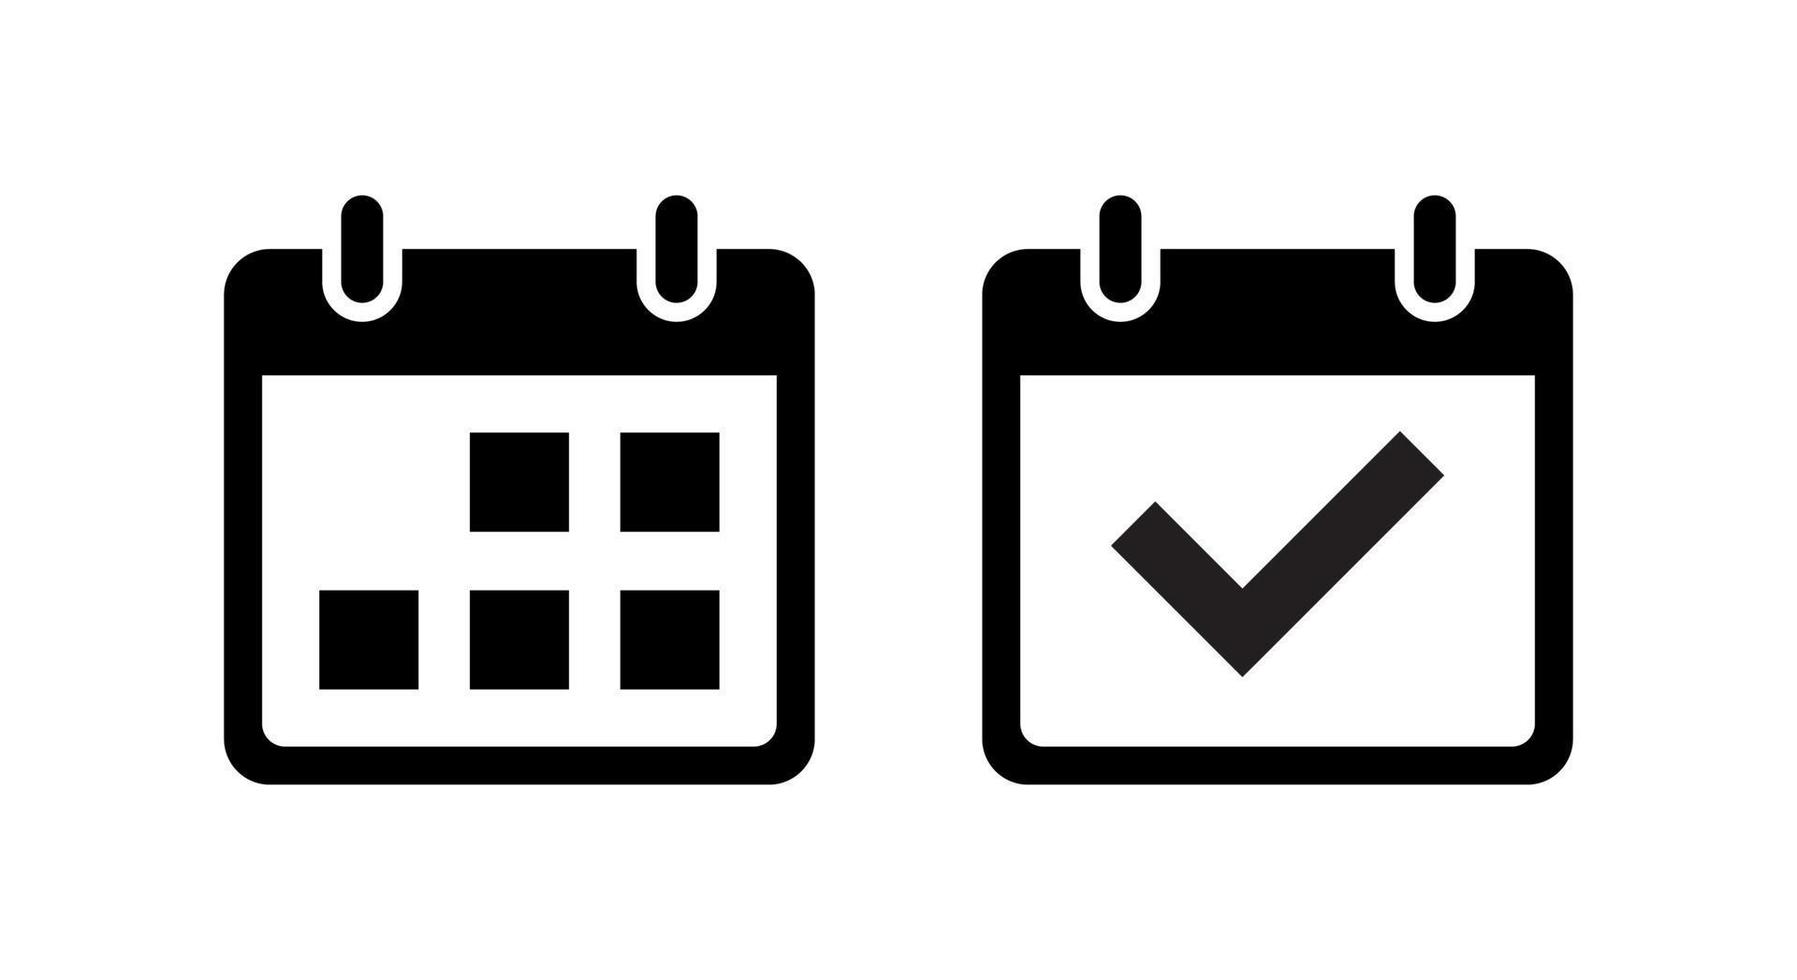 Calendar, schedule date icon vector in clipart style